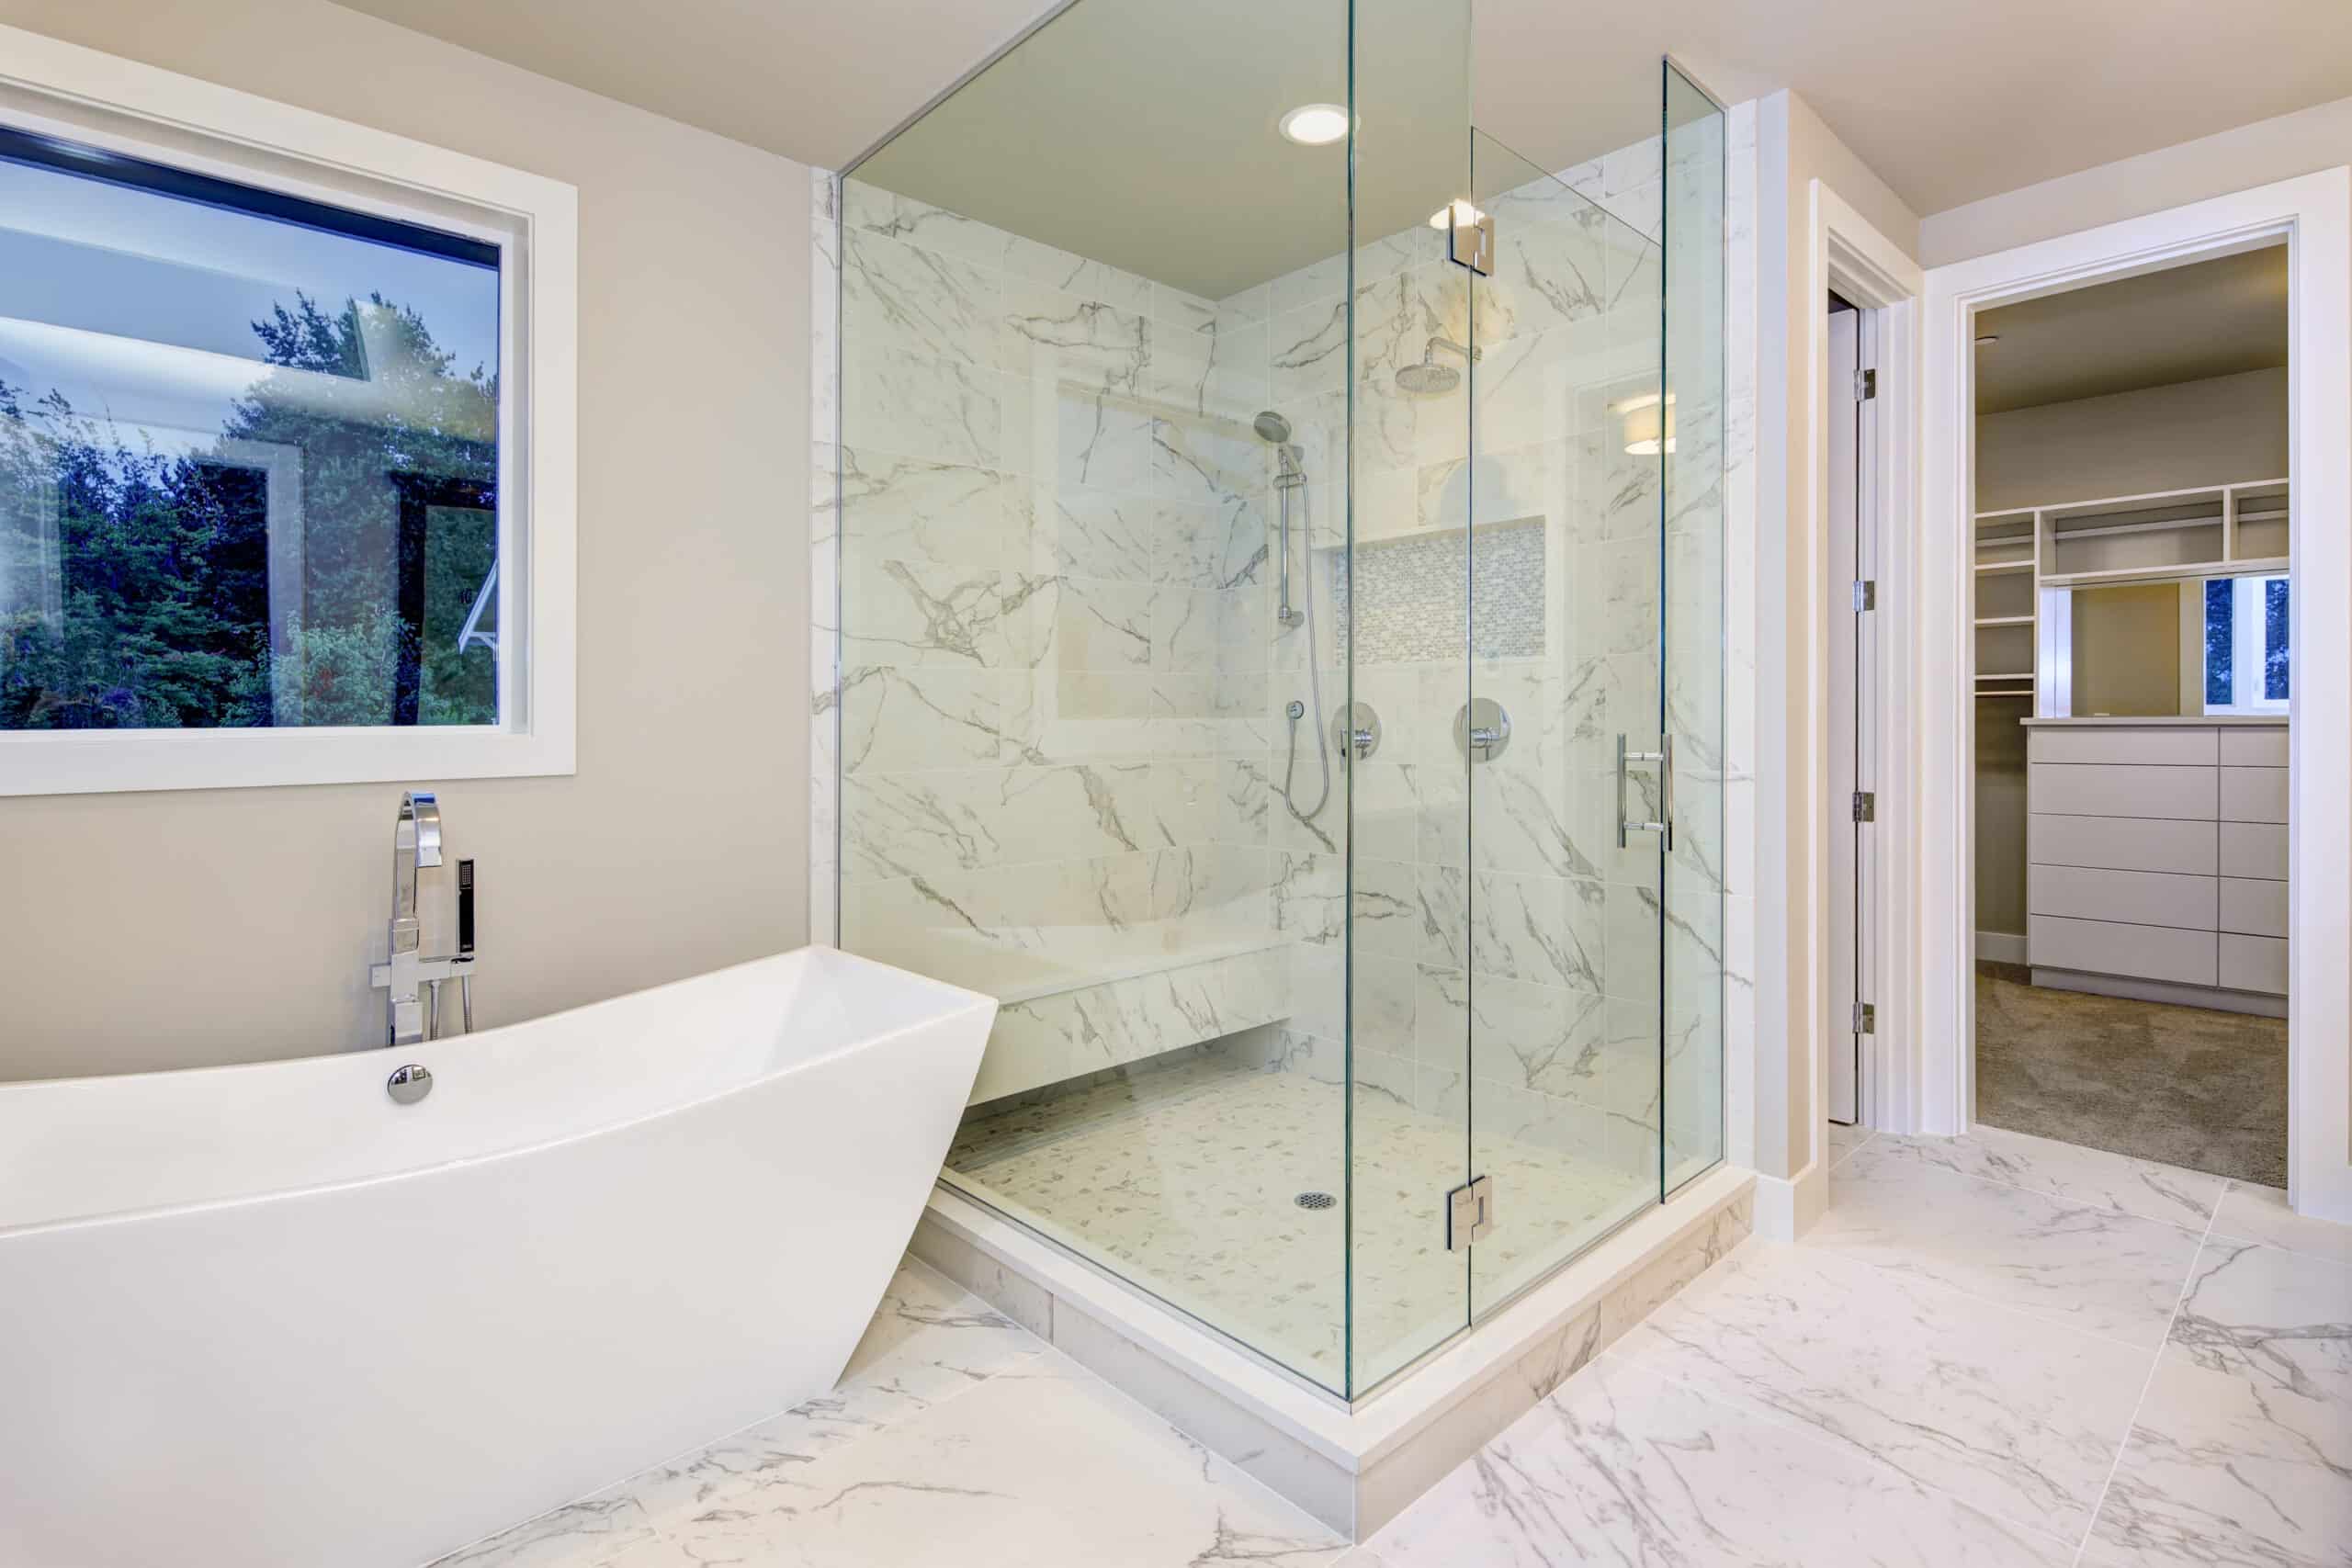 Sleek bathroom features freestanding bathtub atop marble floor placed in front of glass shower accented with rain shower head and gray and white marble surround. Northwest, USA